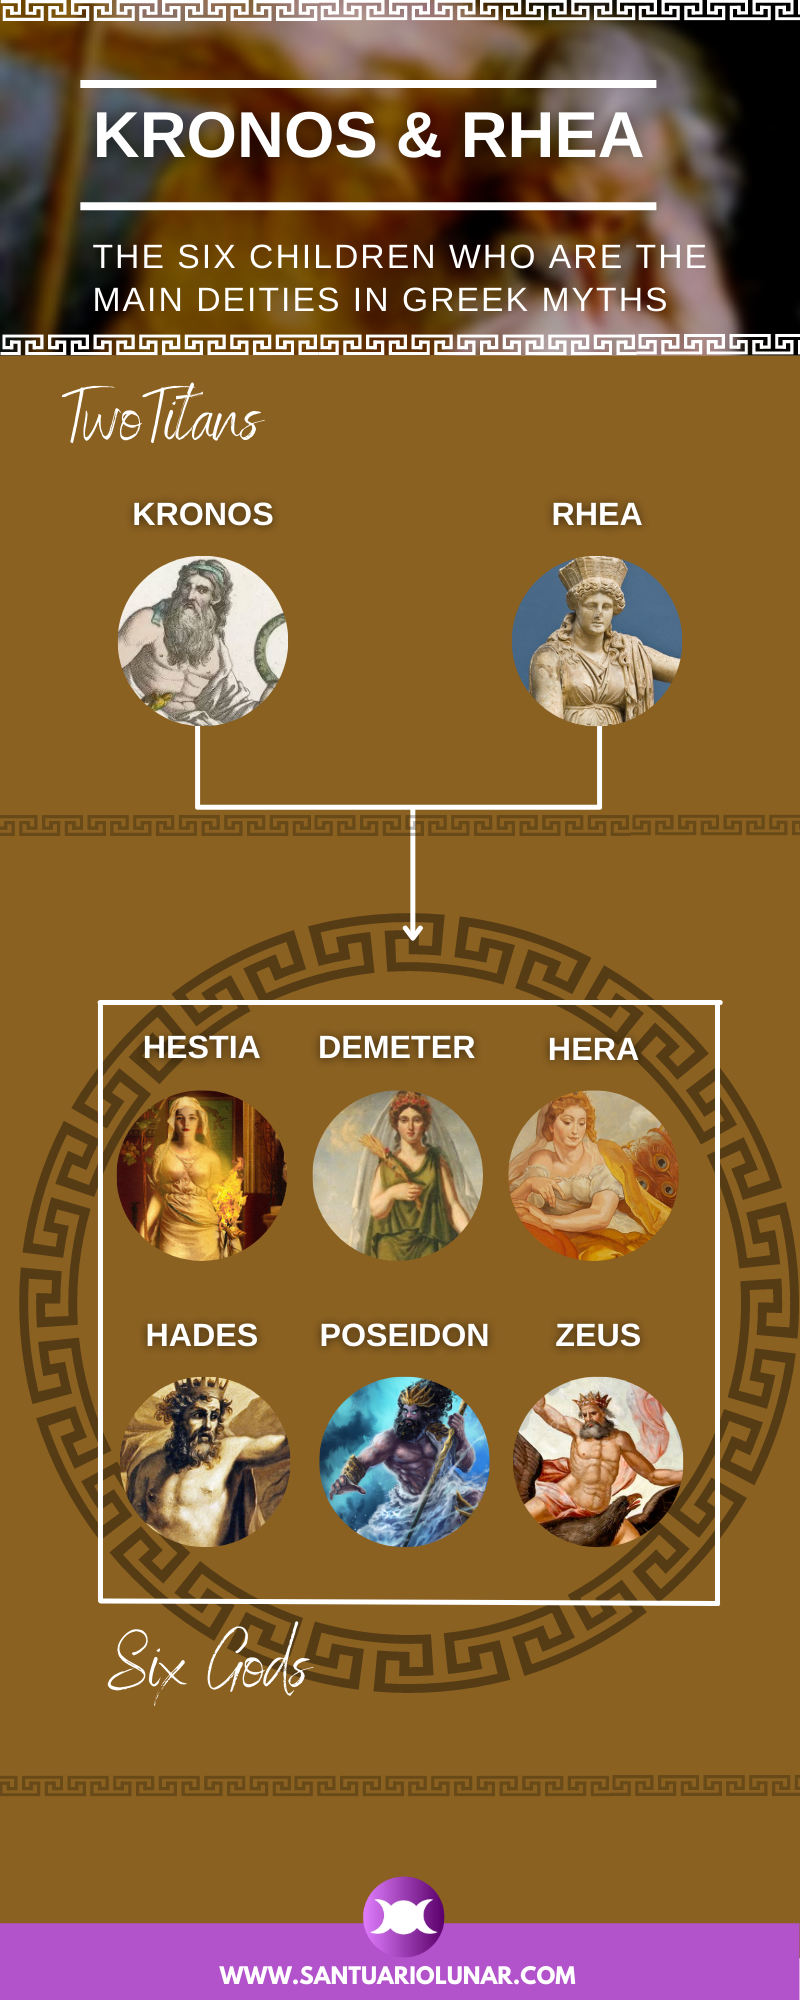 The 6 Children of Kronos and Rhea - Infographic